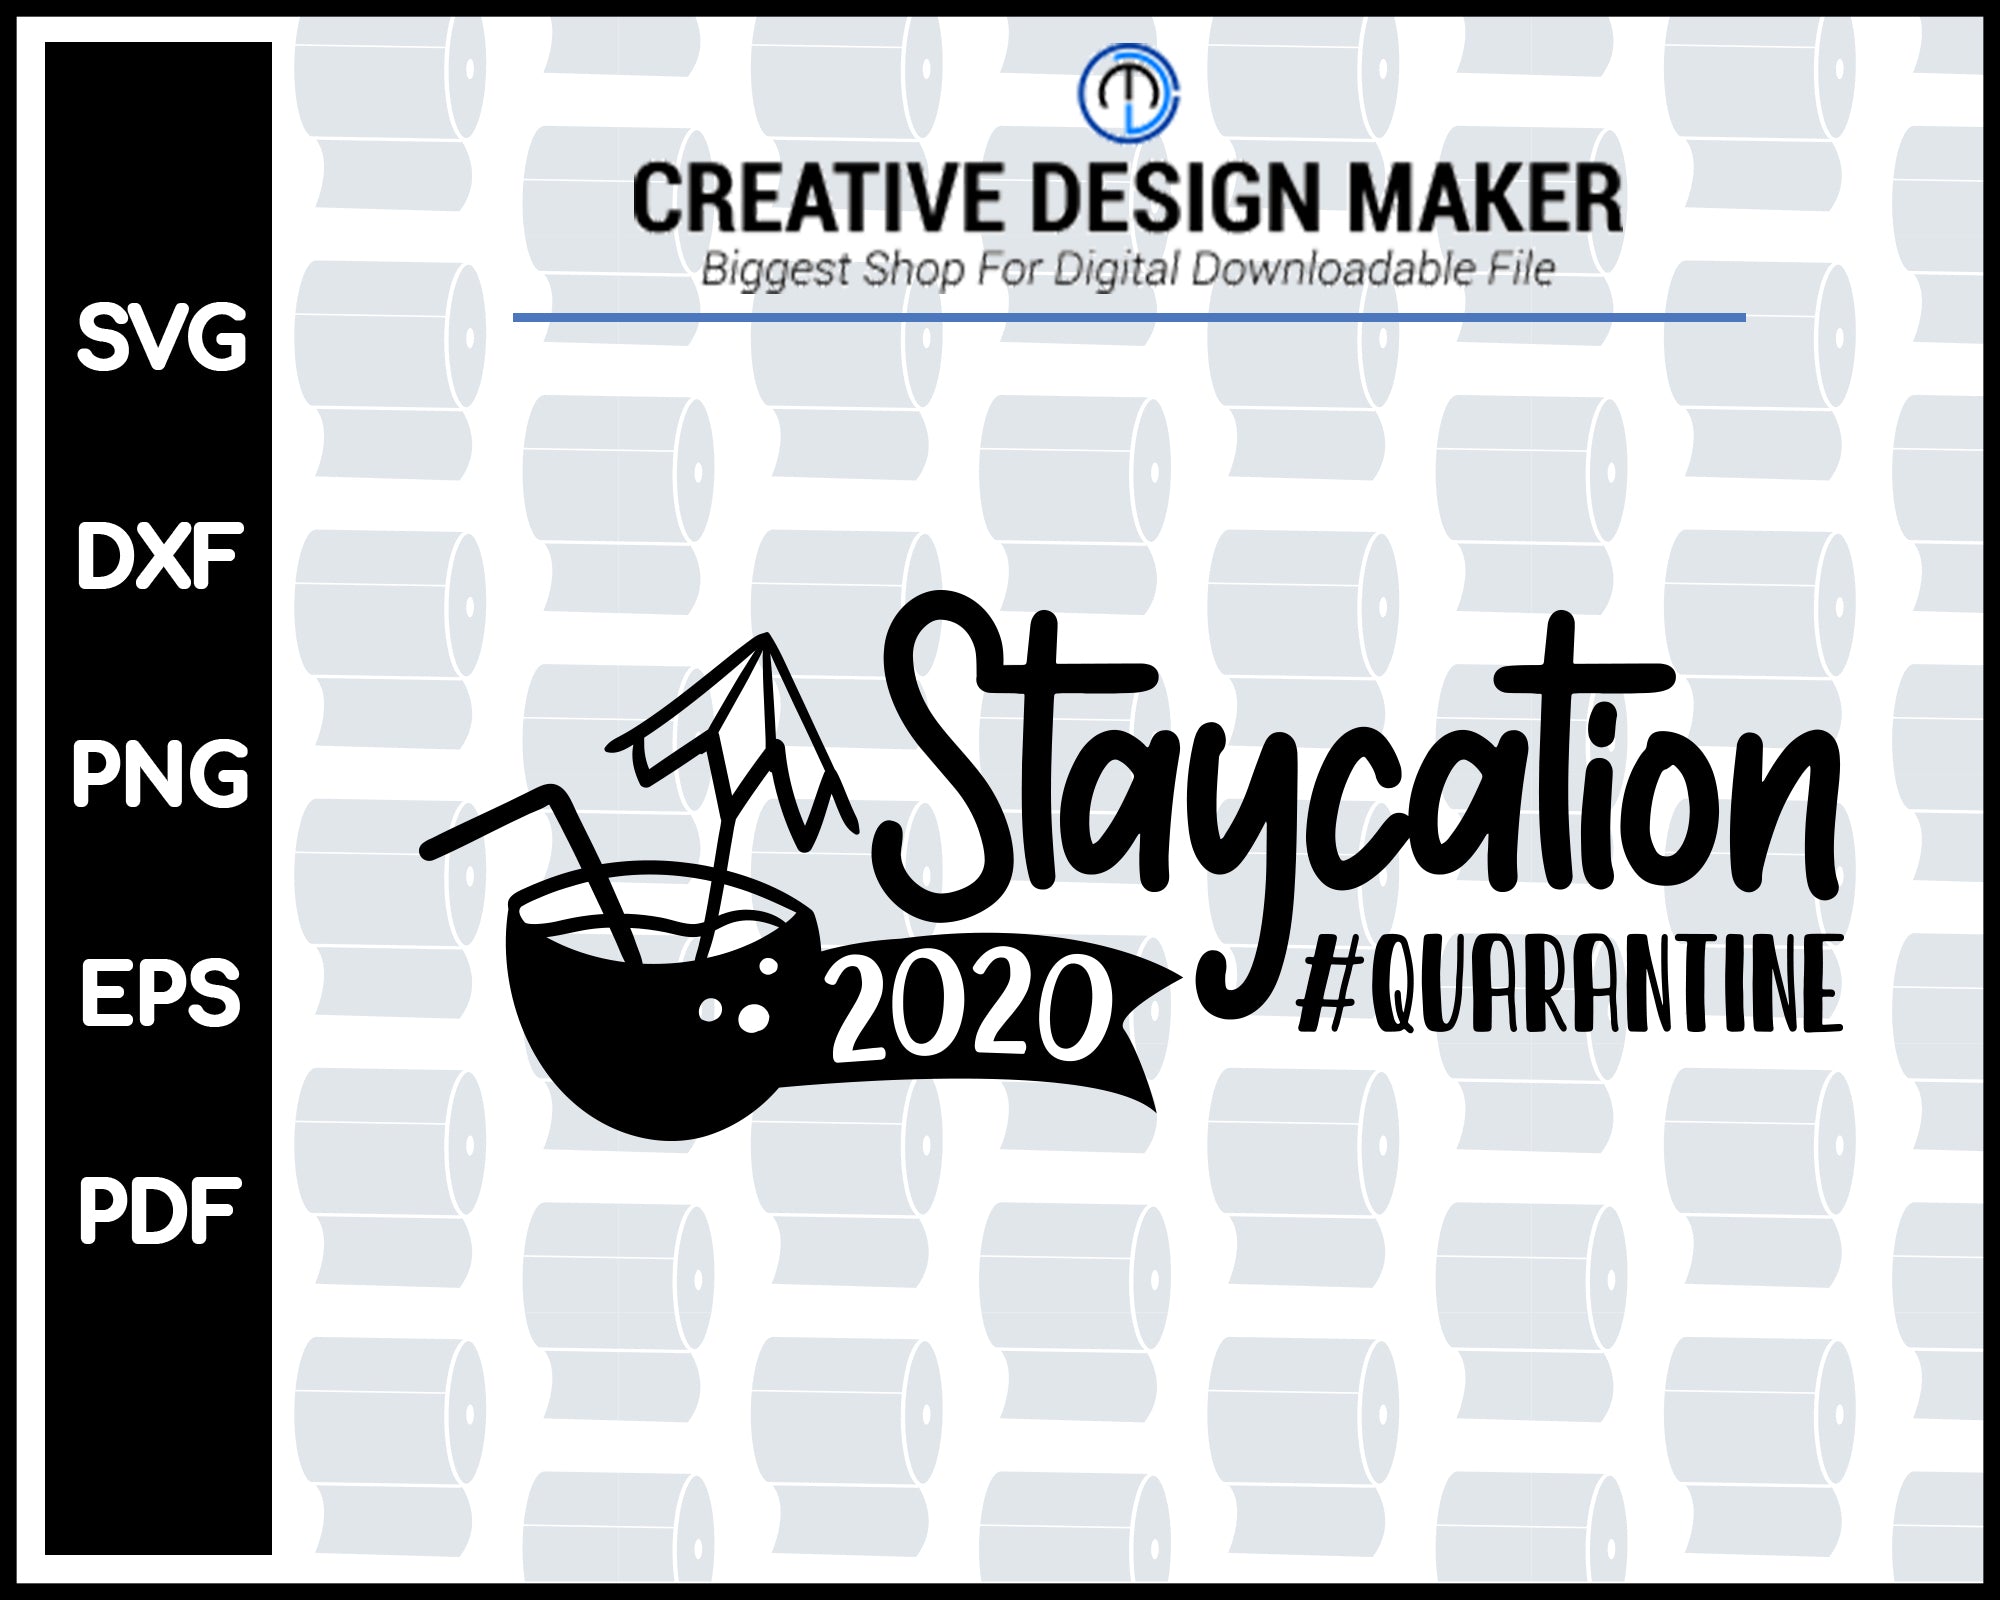 Staycation Quarantine 2020 svg For Cricut Silhouette And eps png Printable Files